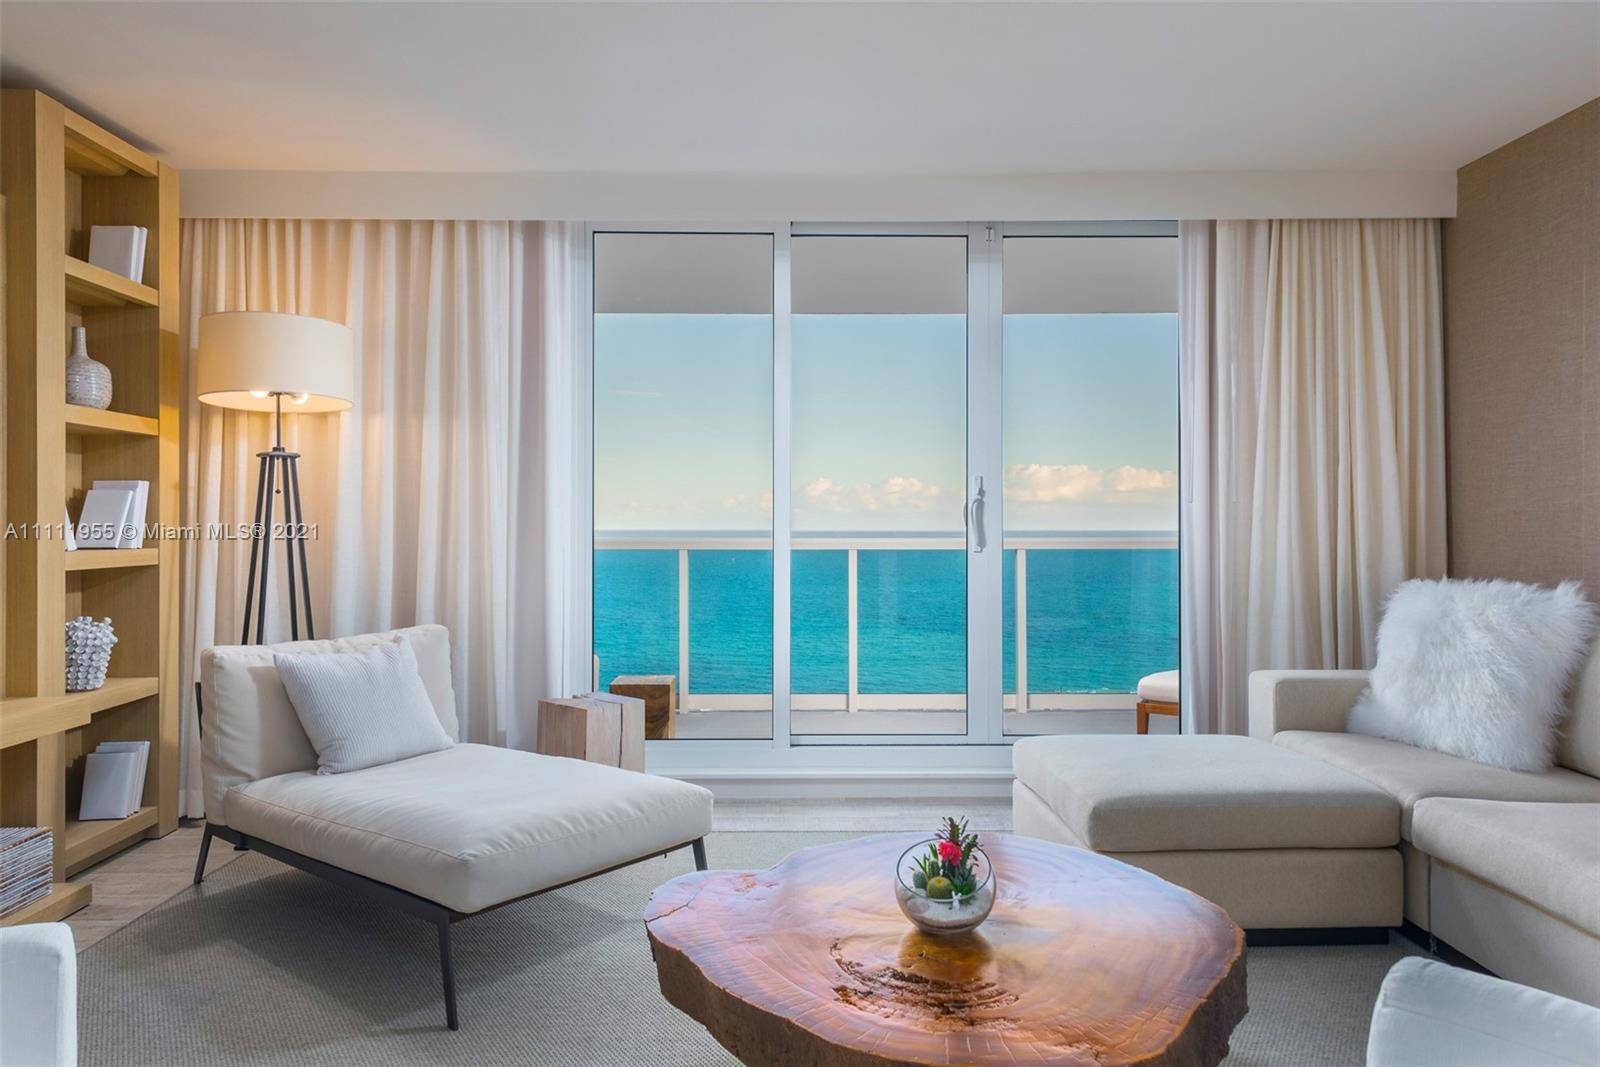 This luxury rental is found in Miami s first eco conscious hotel.